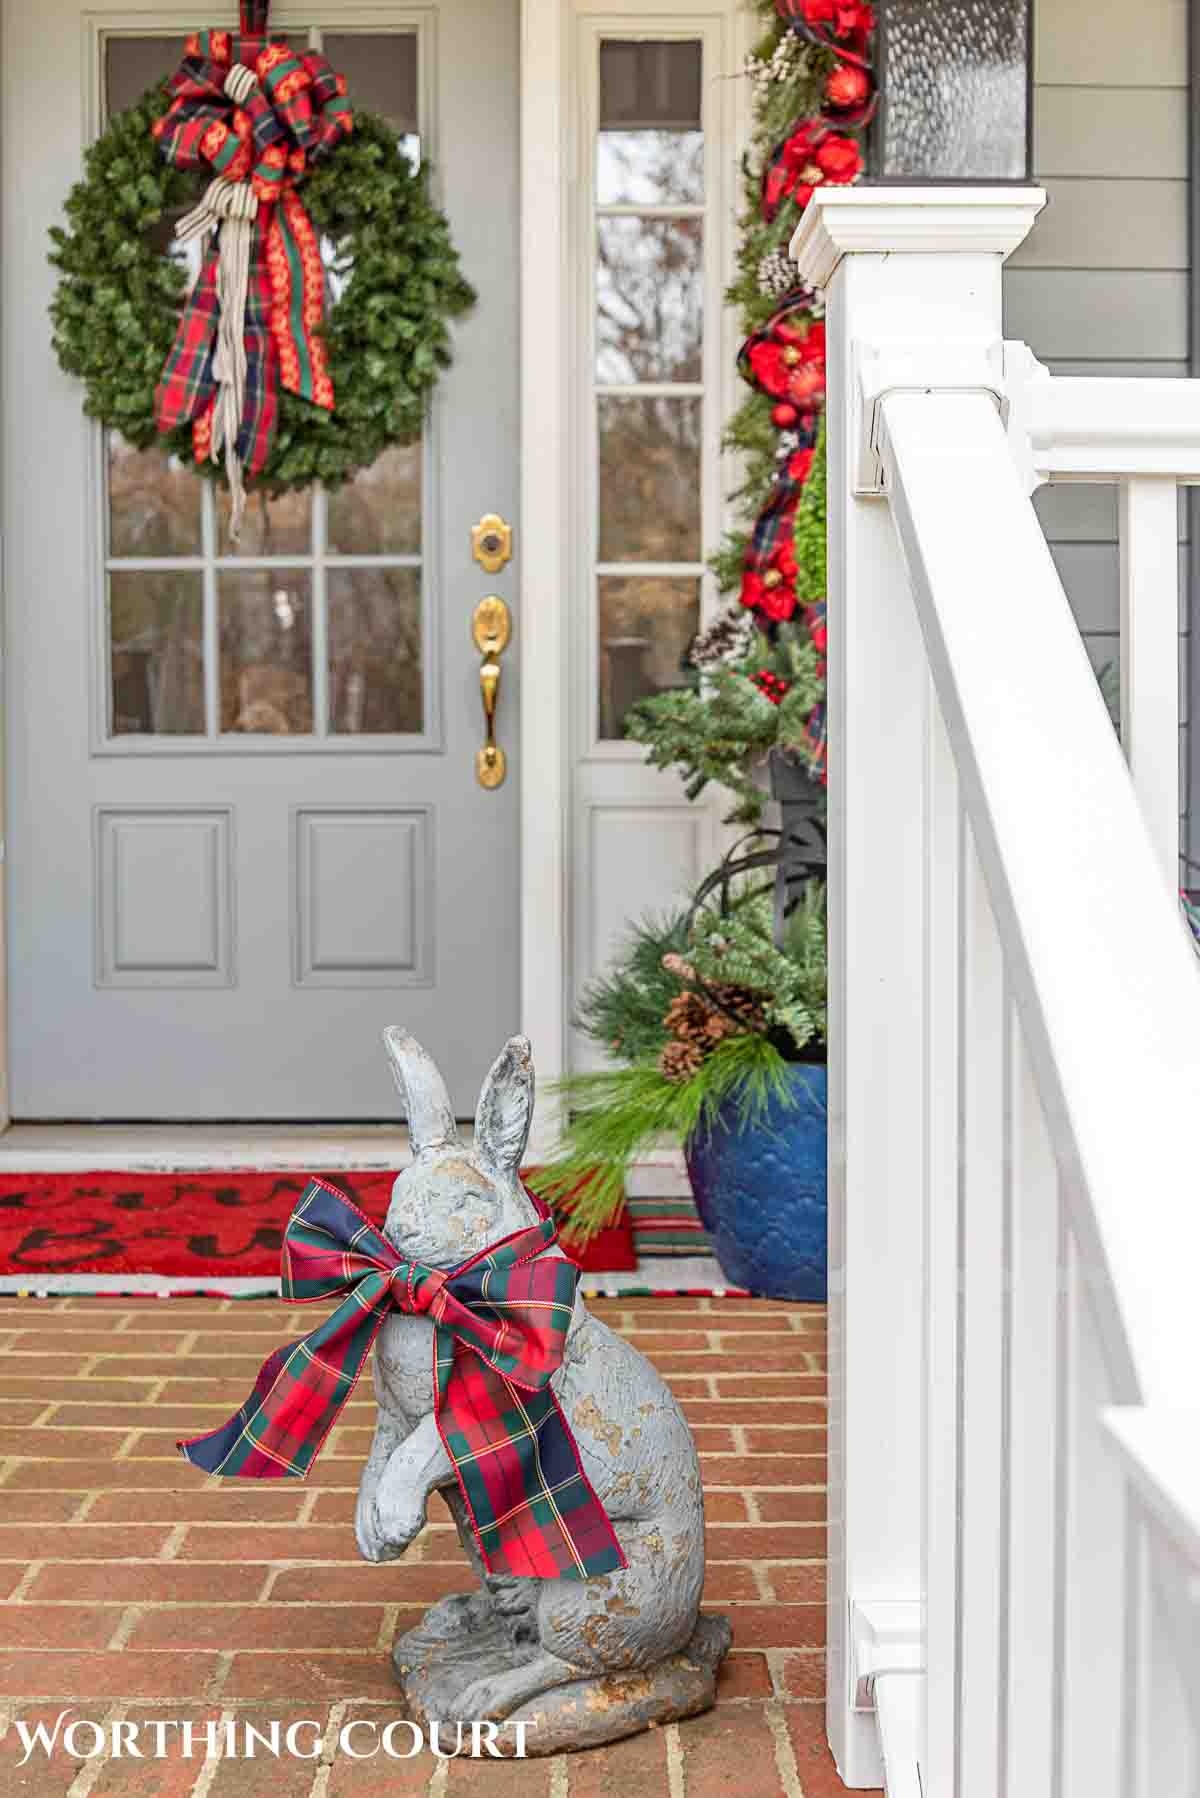 Front porch decorated for Christmas with red and green decorations